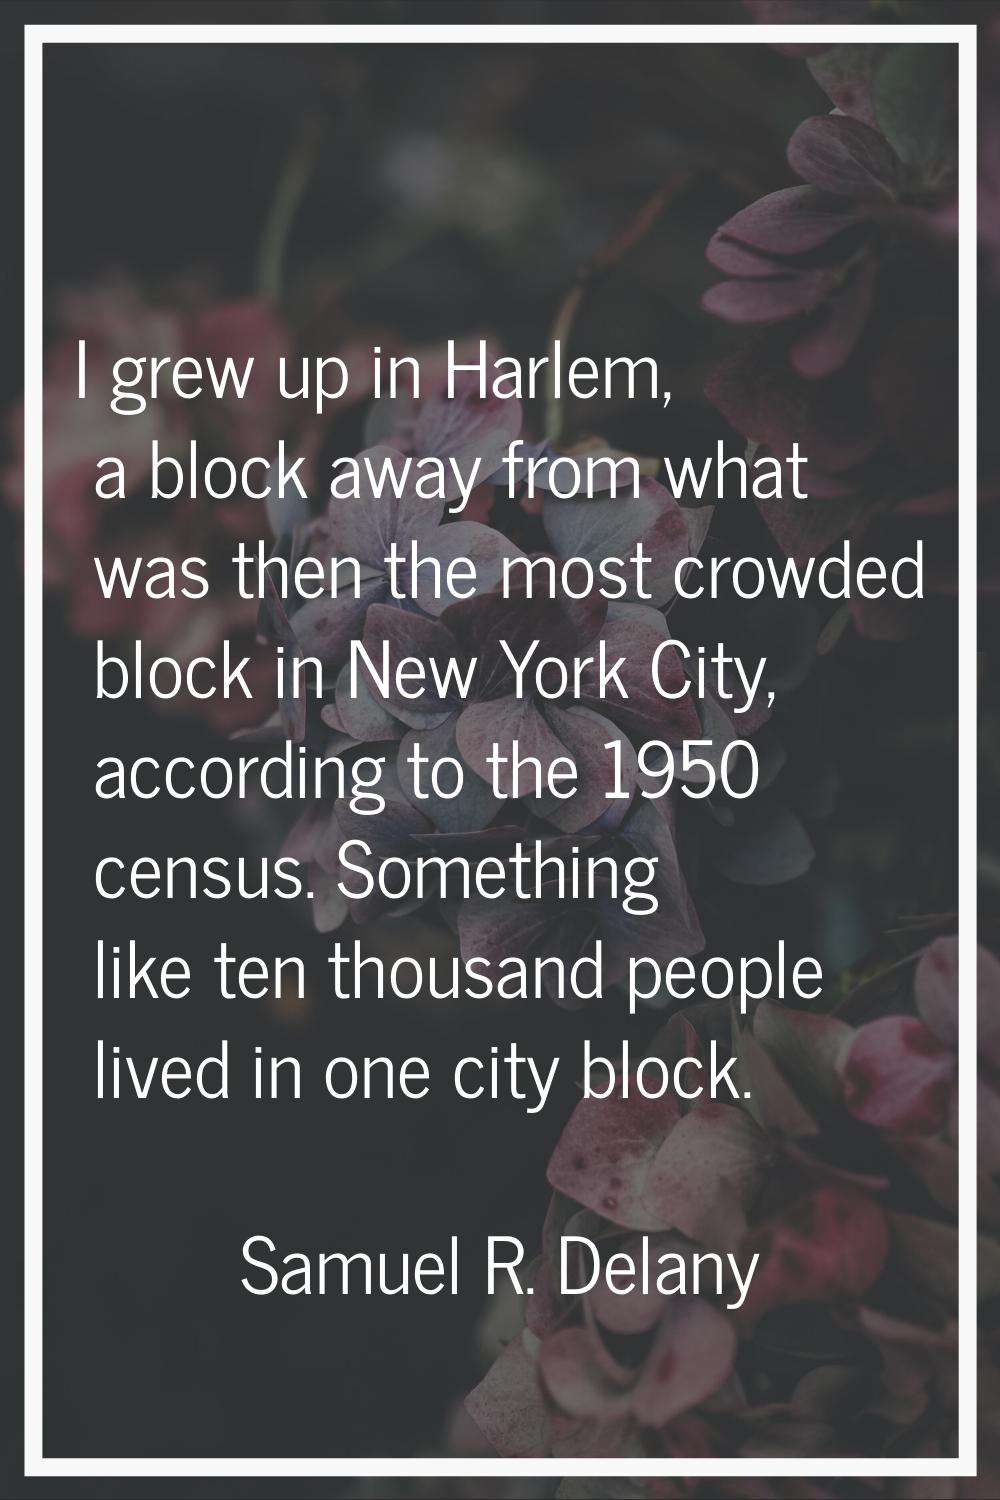 I grew up in Harlem, a block away from what was then the most crowded block in New York City, accor